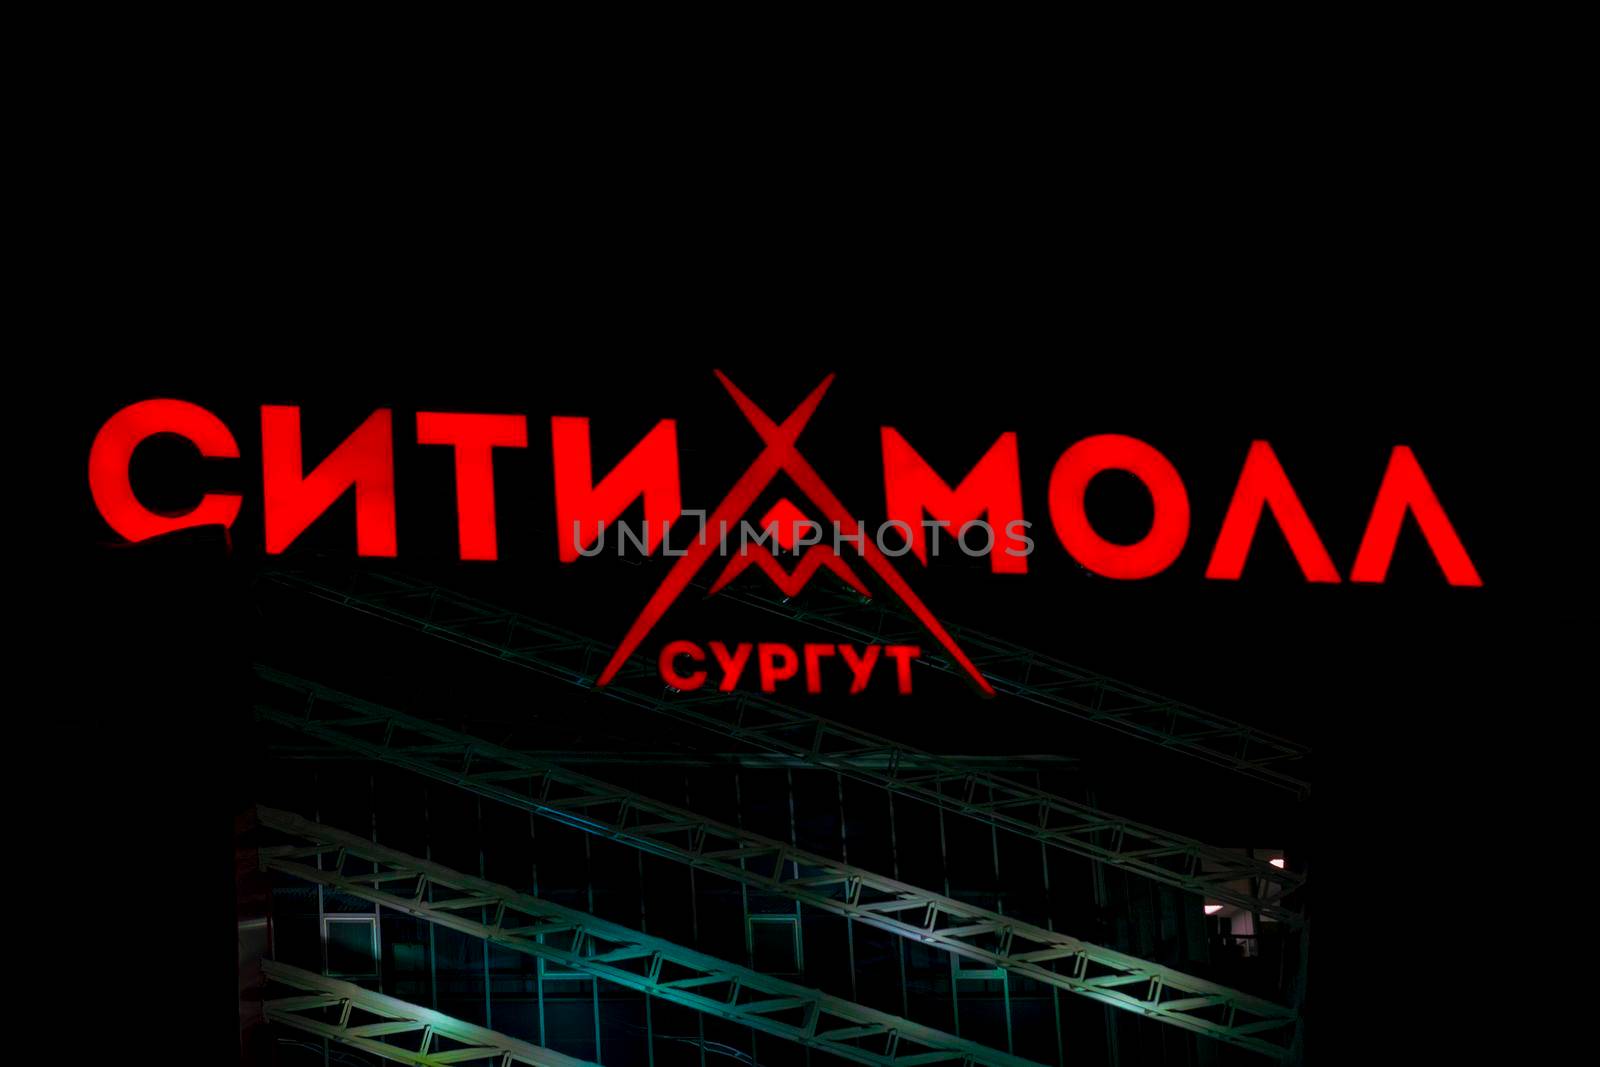 Sign in Russian - Surgut City Mall. Surgut, Russia - 10 January, 2020 by Essffes